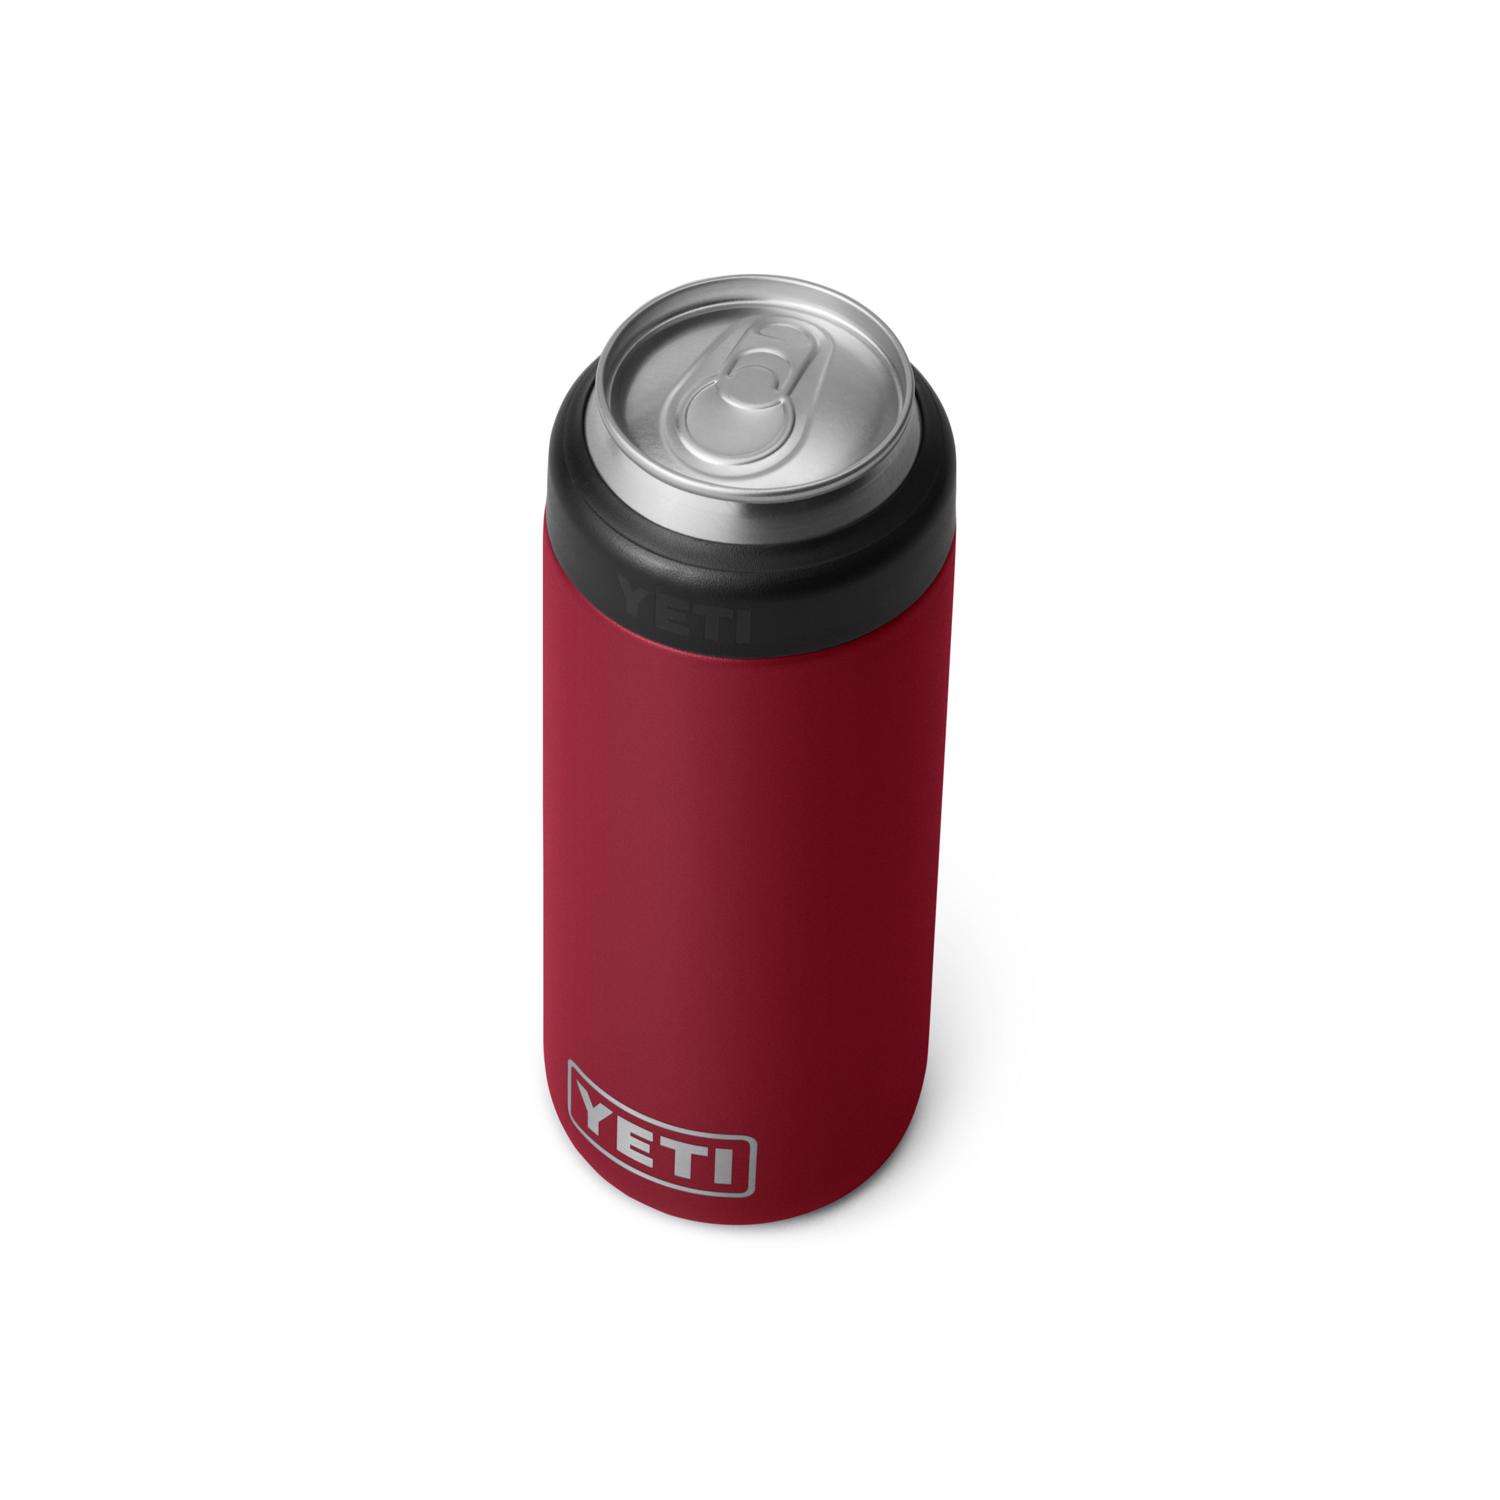 Yeti 20 oz Rambler Tumbler Harvest Red with Flaws